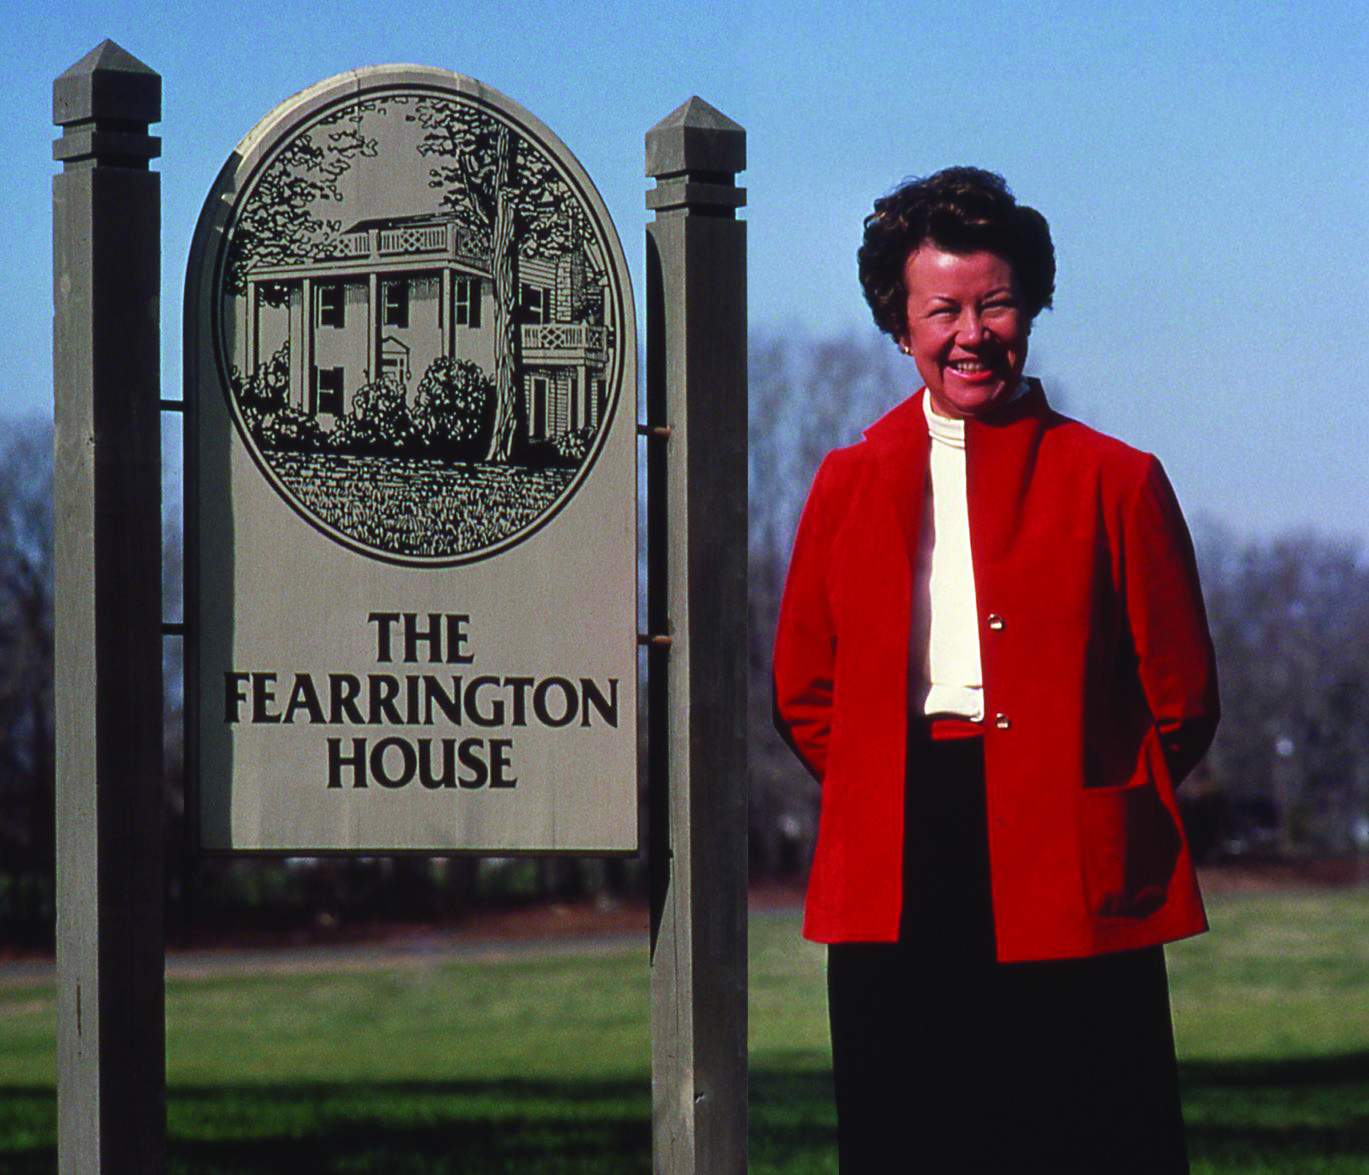 Jenny fitch by The Fearrington House sign